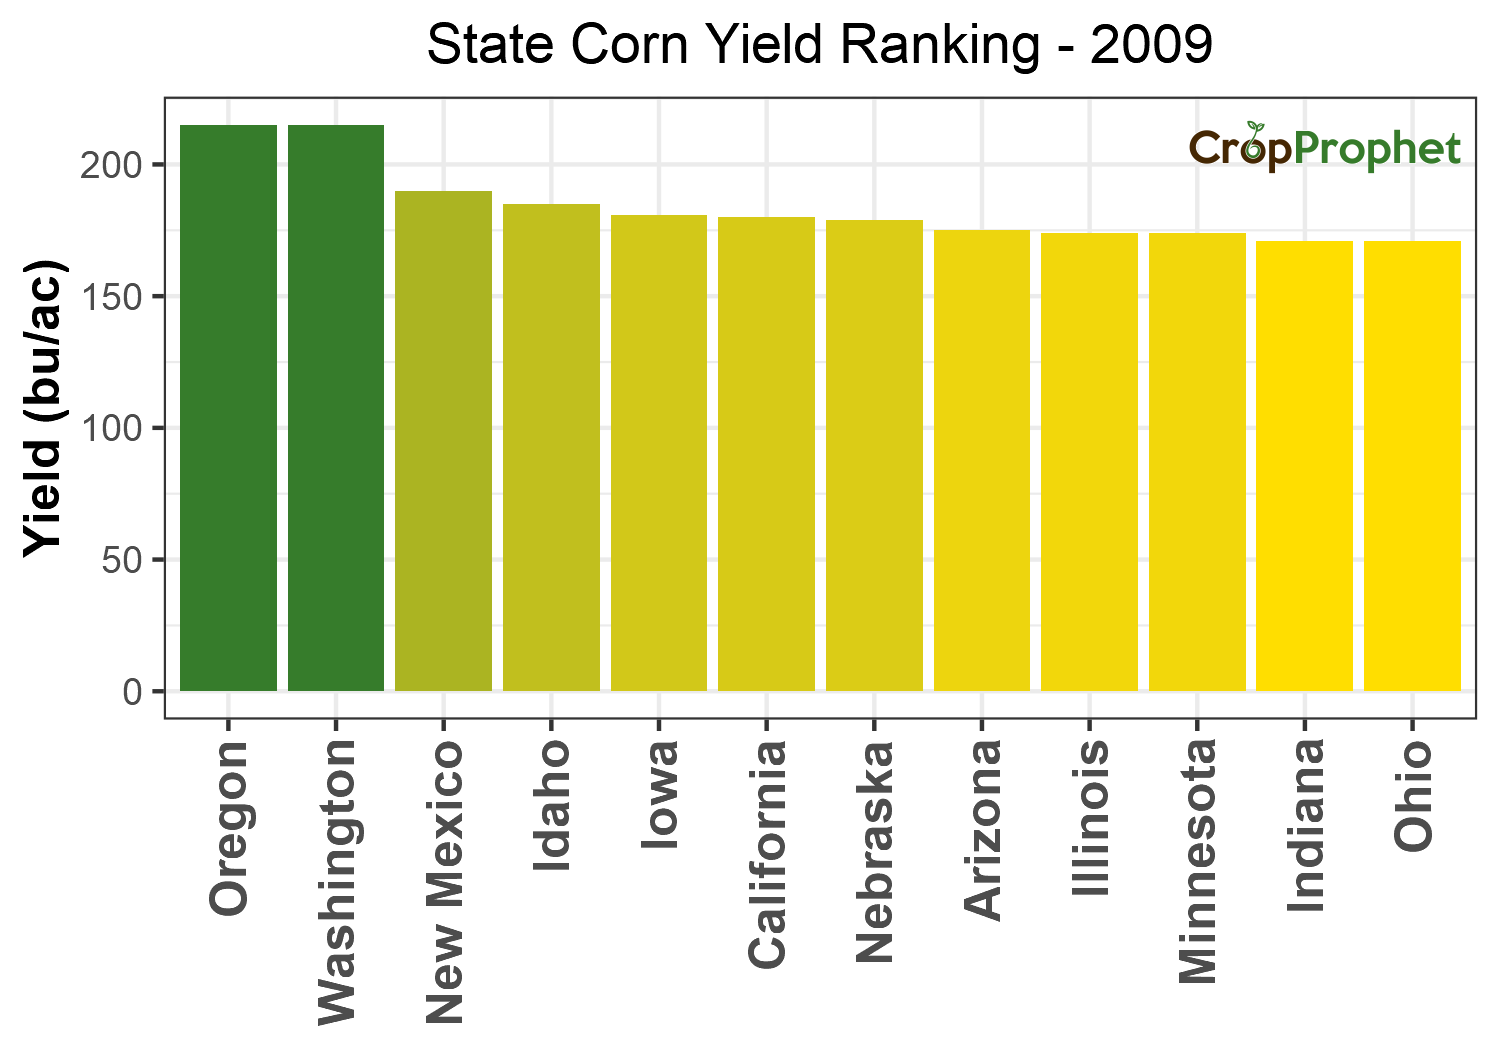 Corn Production by State - 2009 Rankings